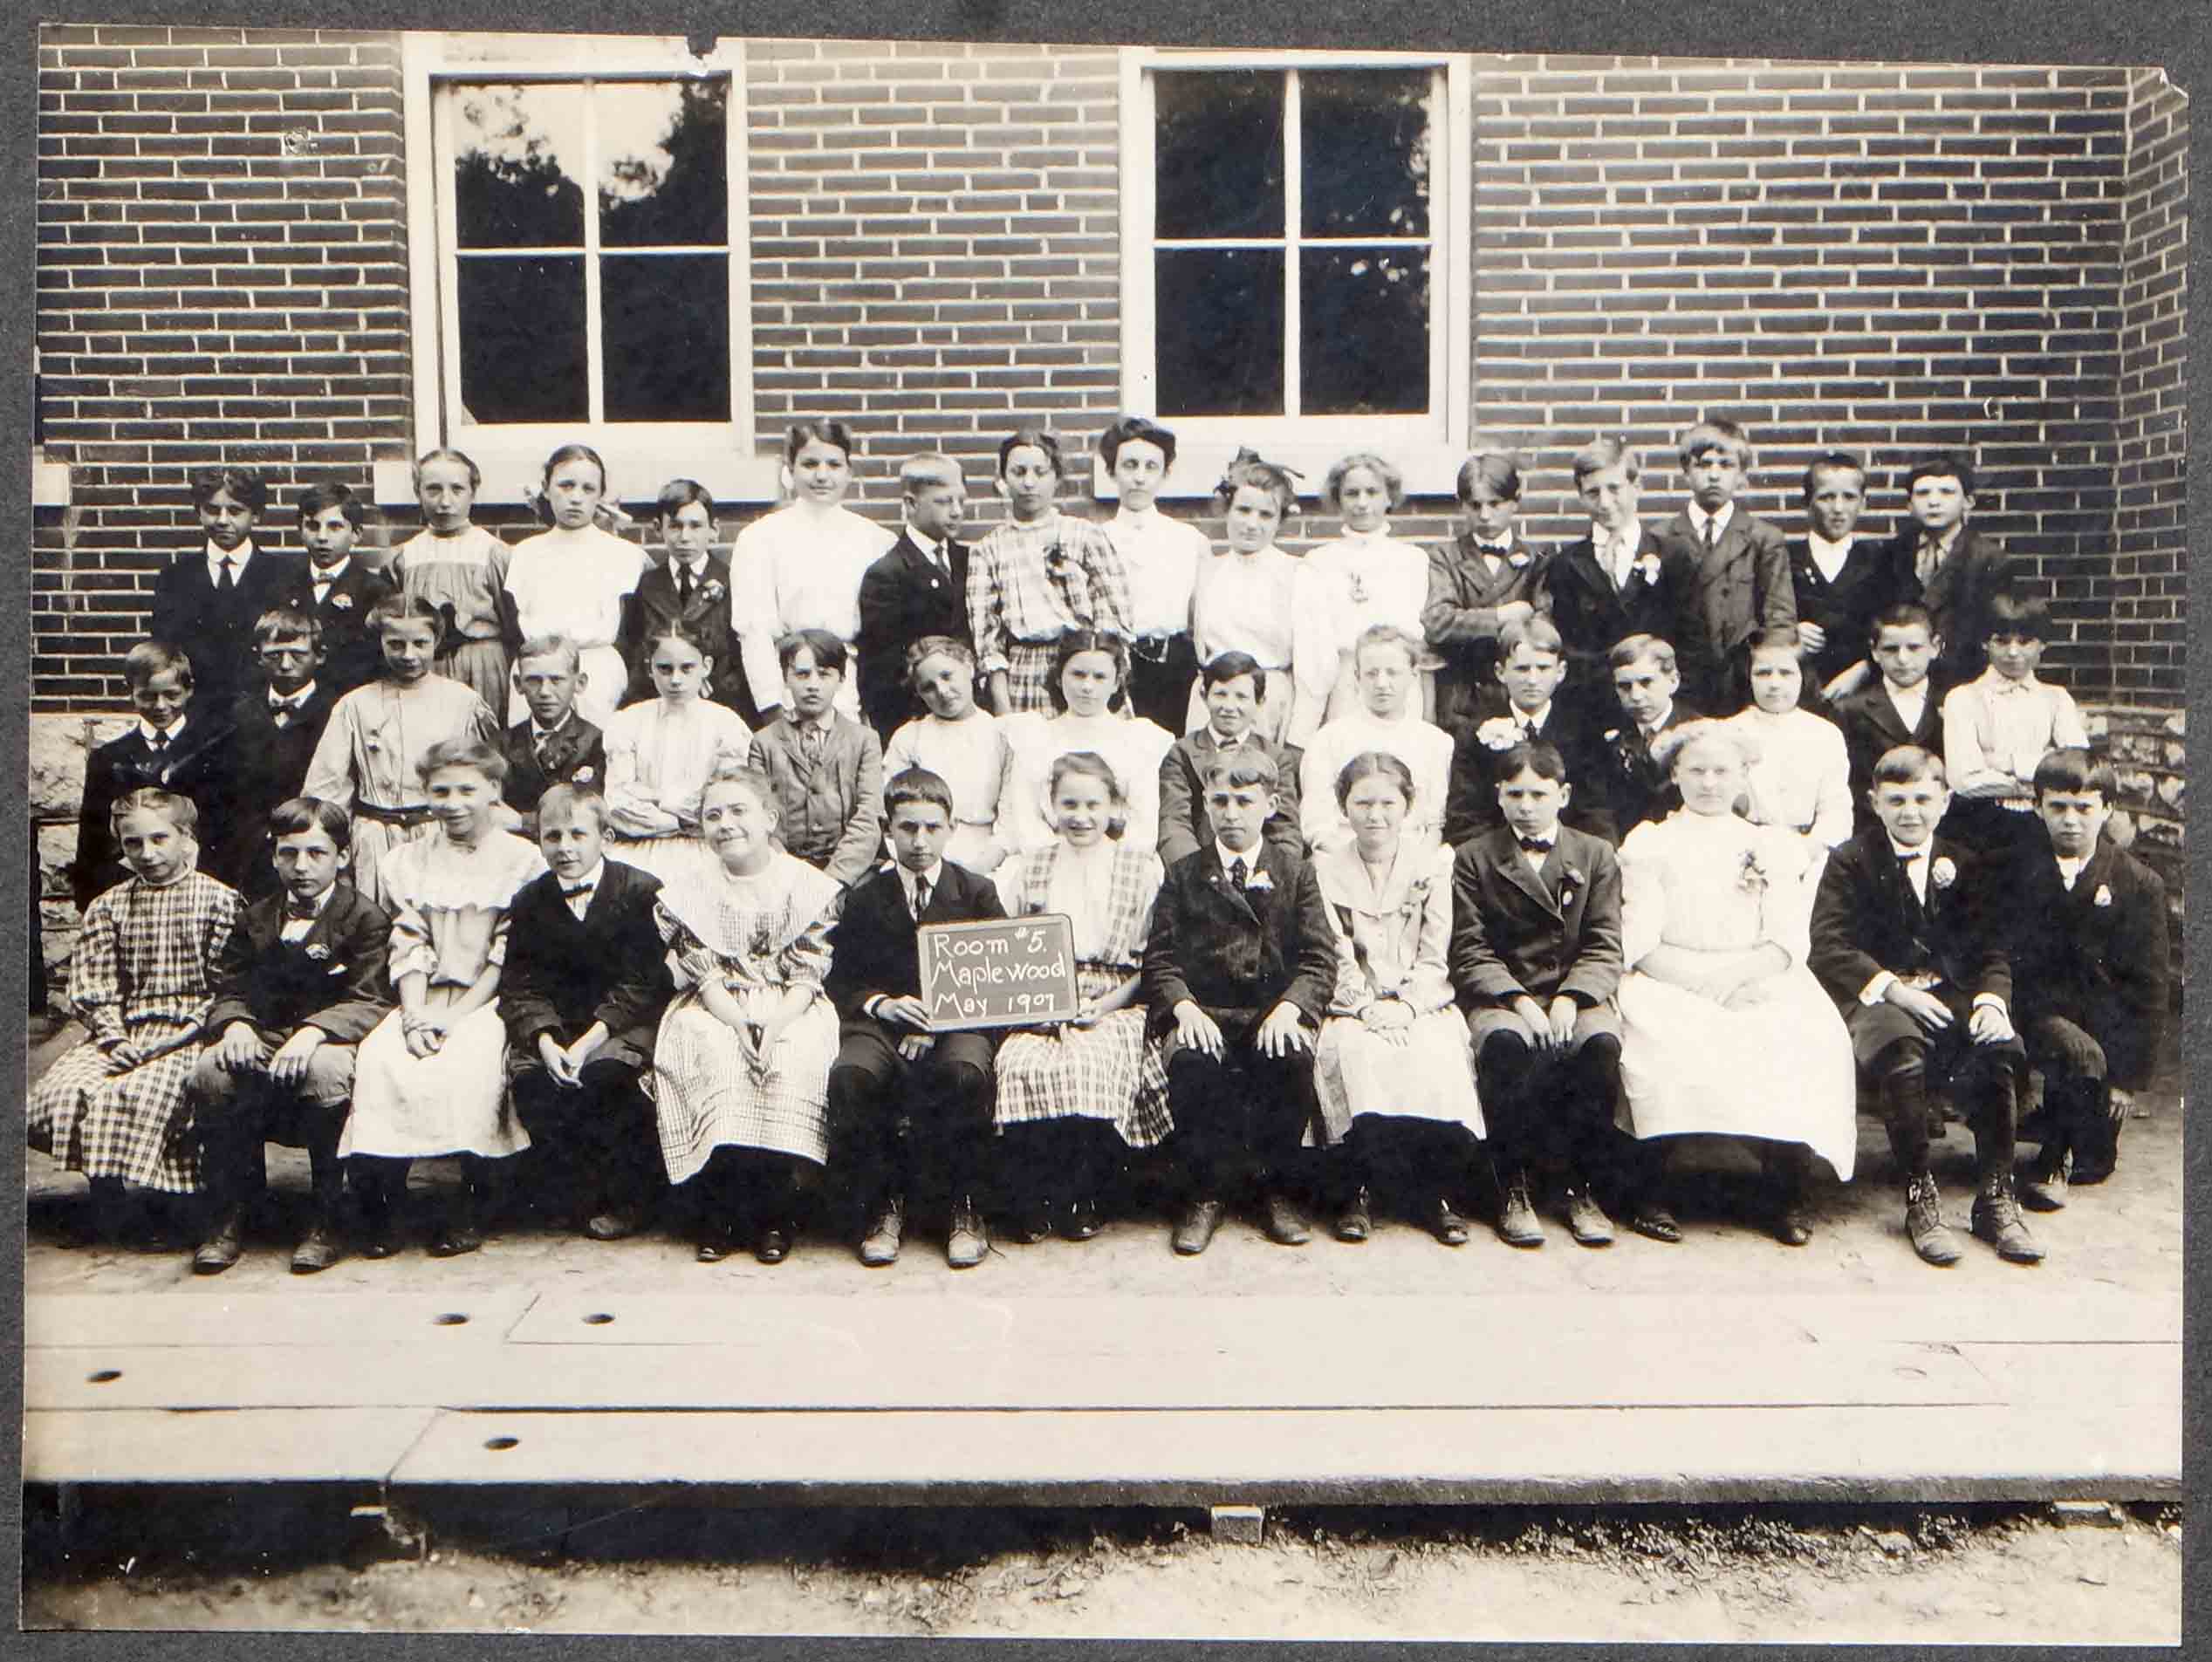 Maplewood History: Newly Discovered Early Images of the Maplewood School